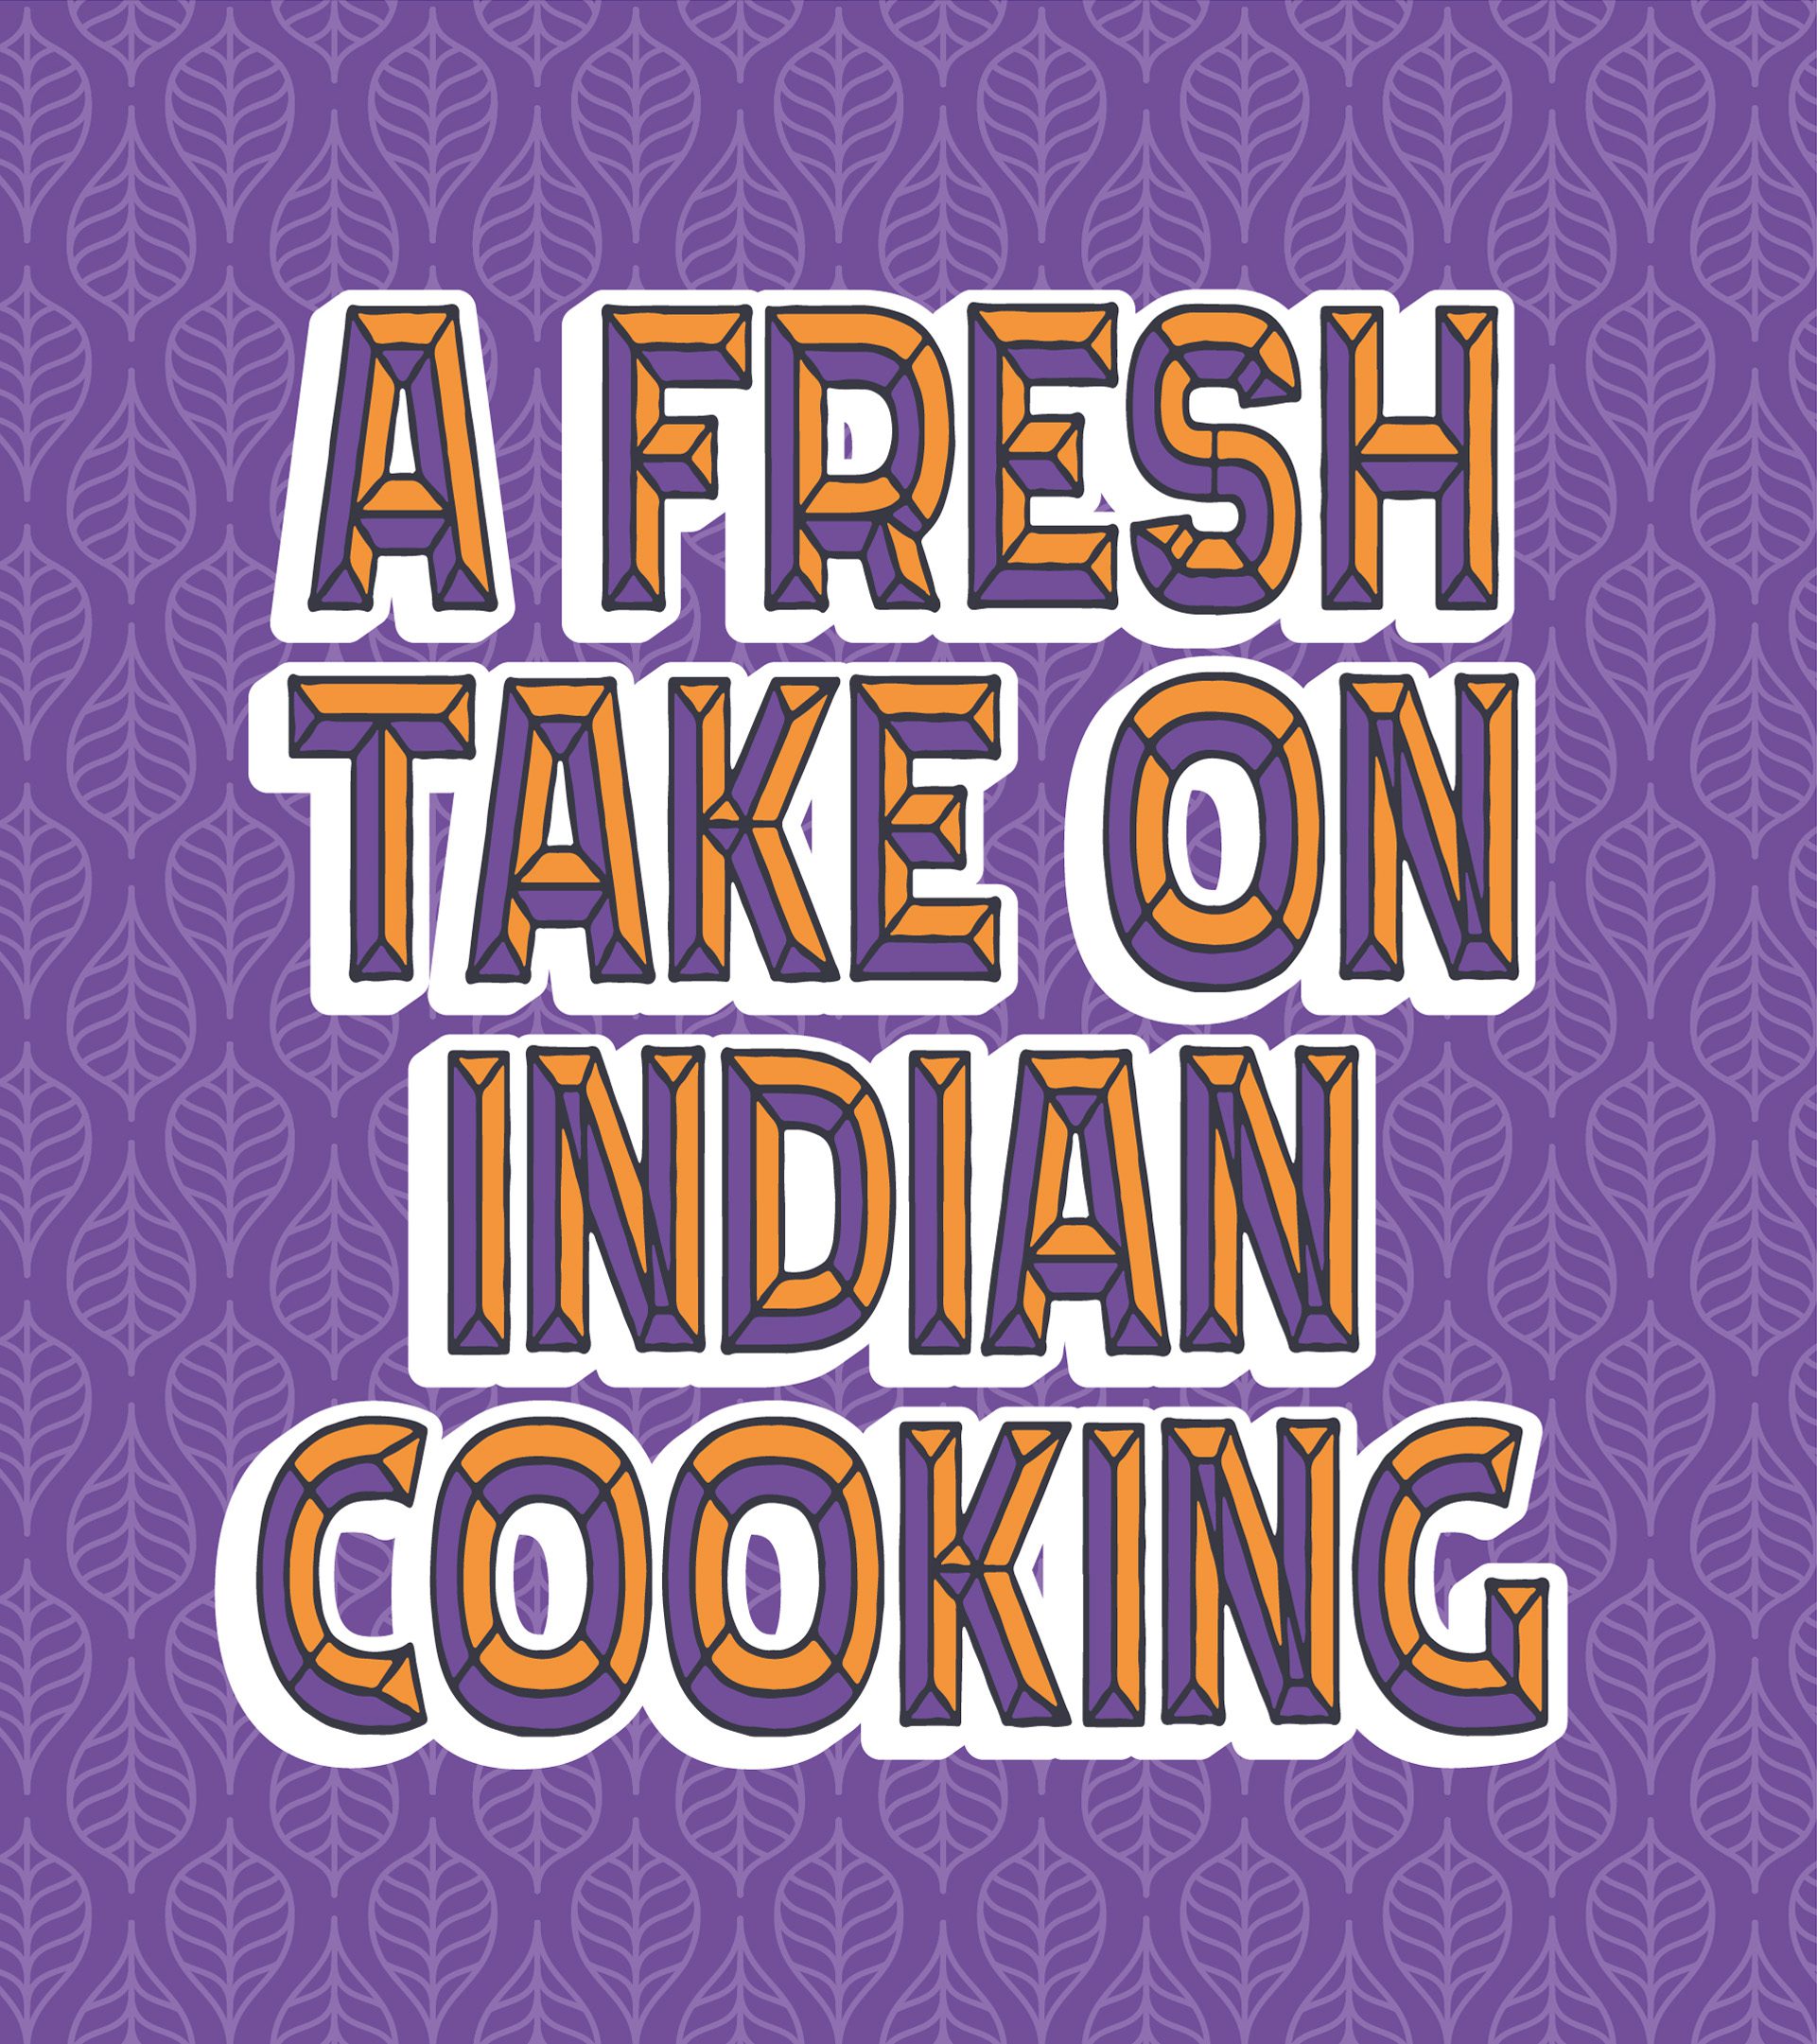 A fresh take on Indian cooking